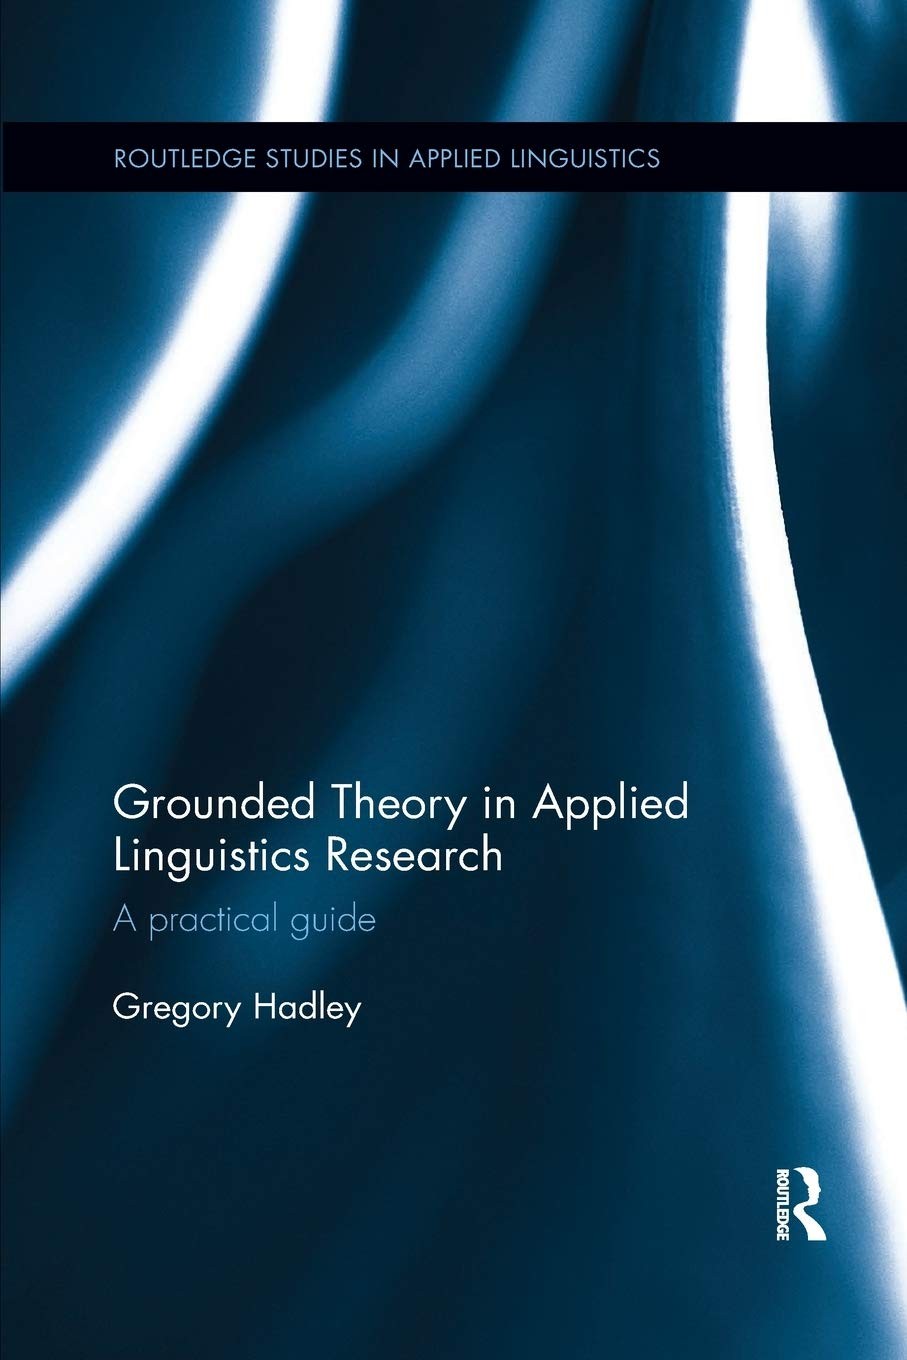 Grounded Theory in Applied Linguistics Research: A Practical Guide